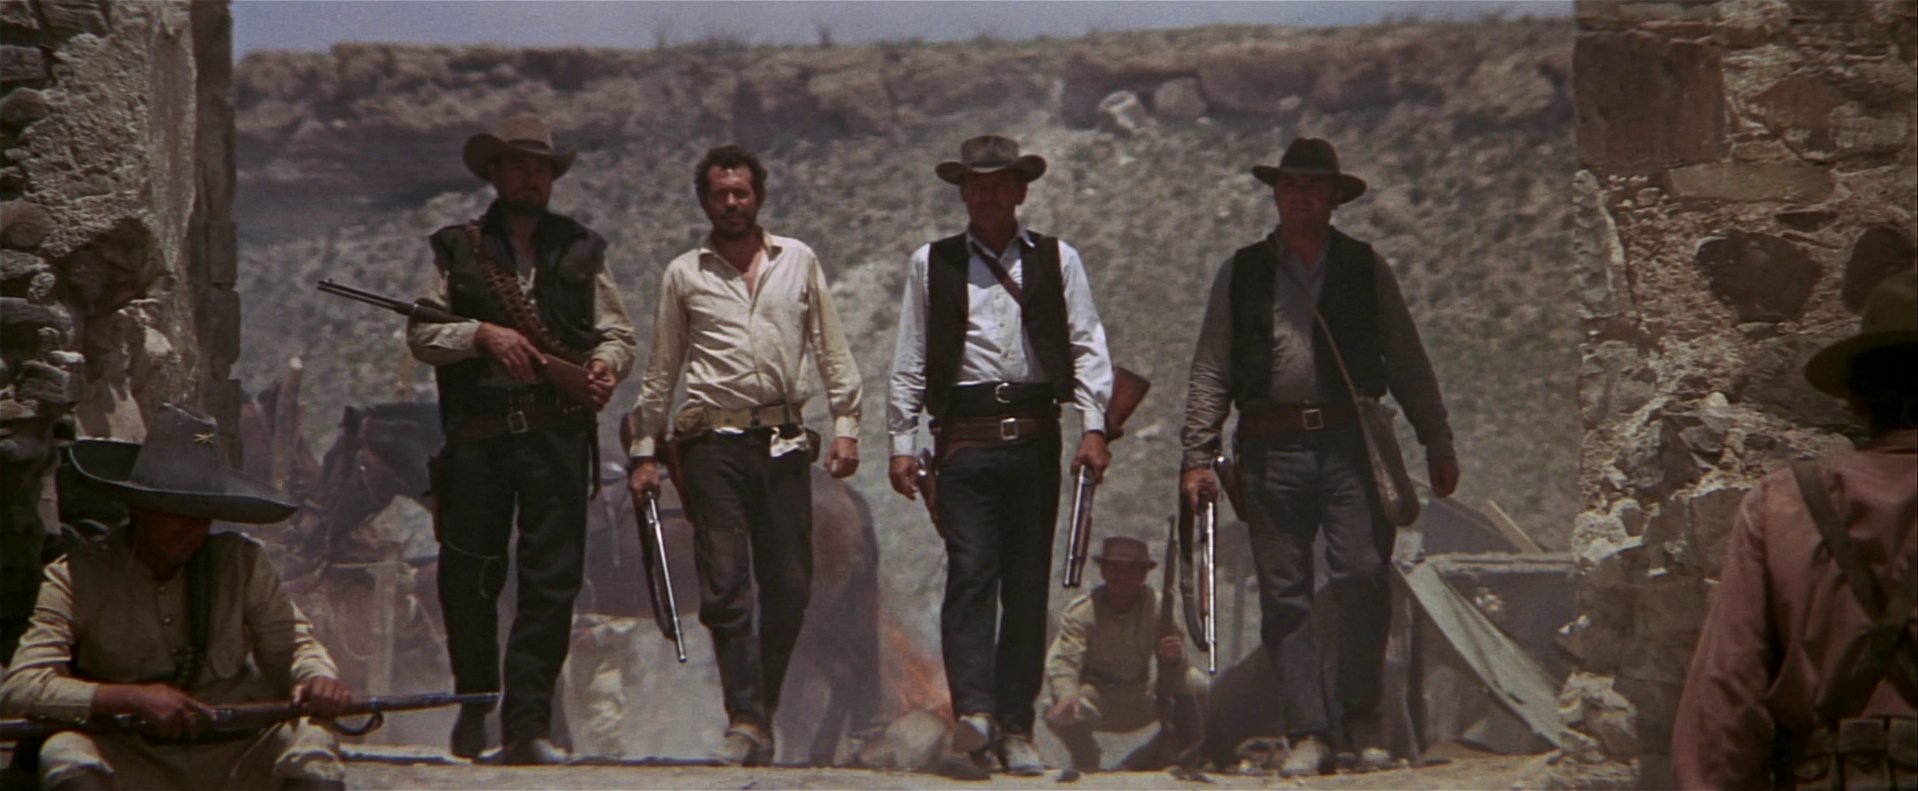 Ben Johnson, Warren Oates, William Holden and Ernest Borgnine march side by side as armed outlaws into the camp of Mexican soldiers.